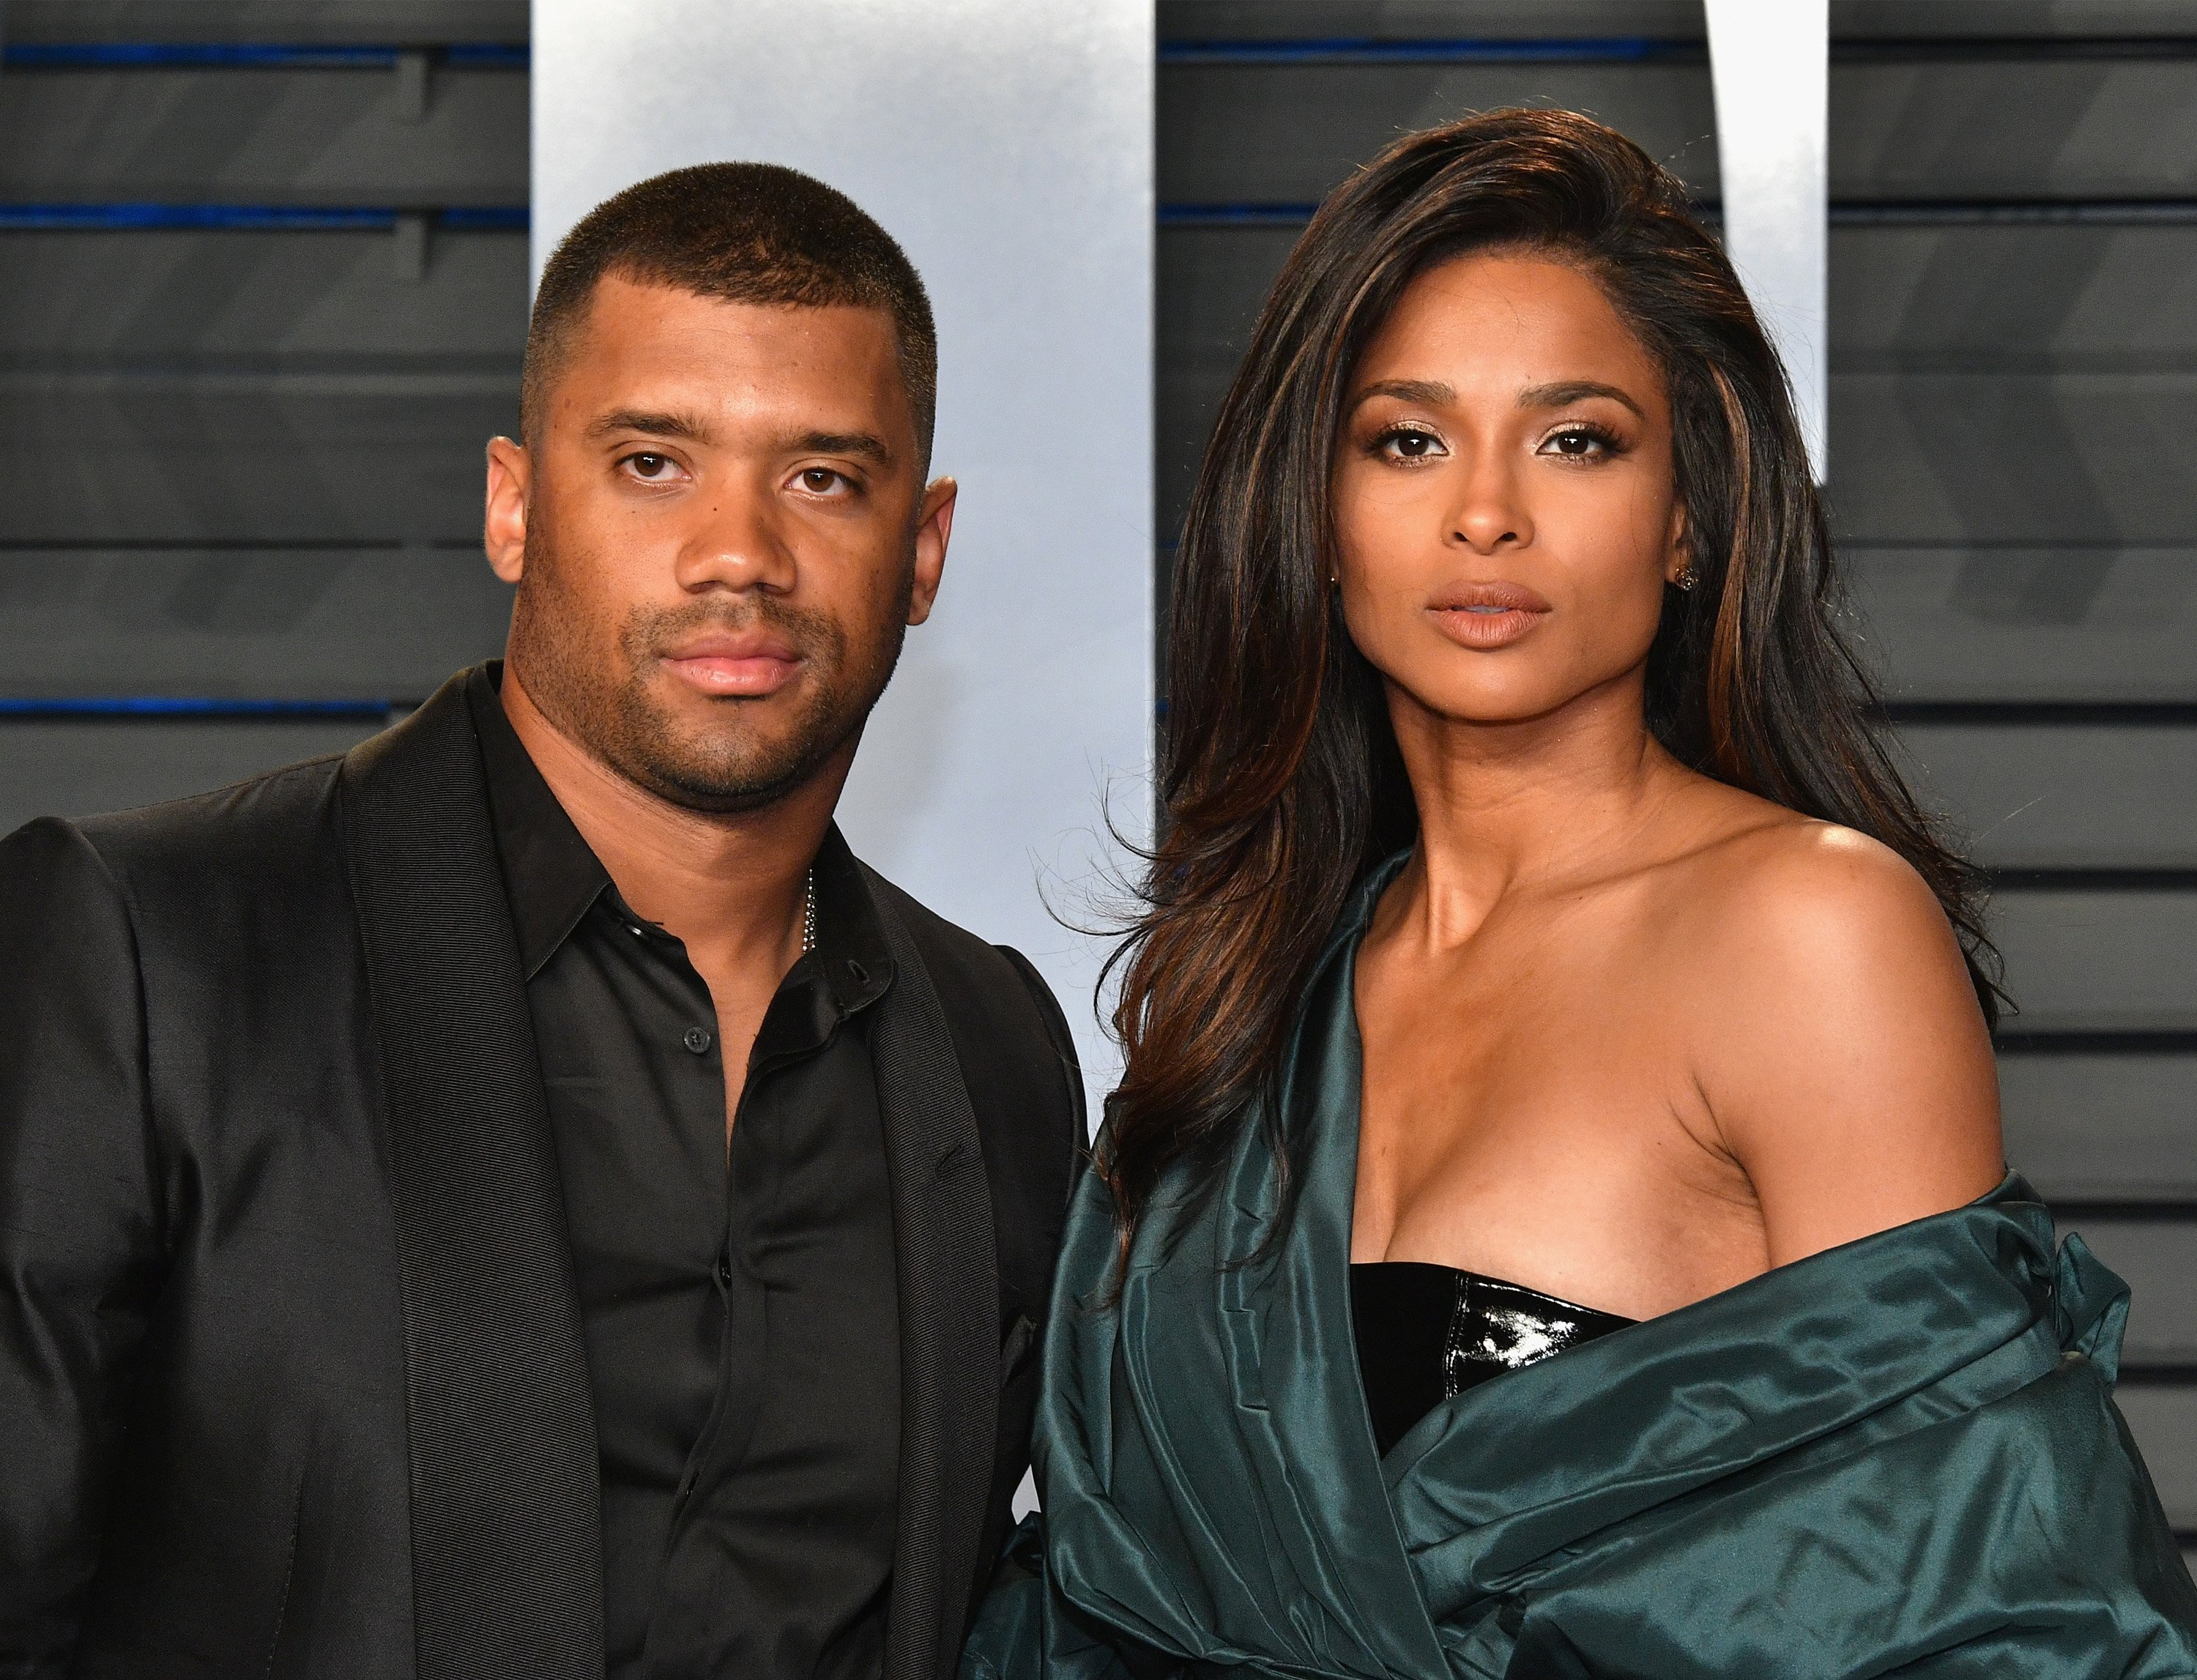 Russell and Ciara Wilson pictured at the 2018 Vanity Fair Oscar Party on March 4, 2018 in Beverly Hills, California. | Source: Getty Images